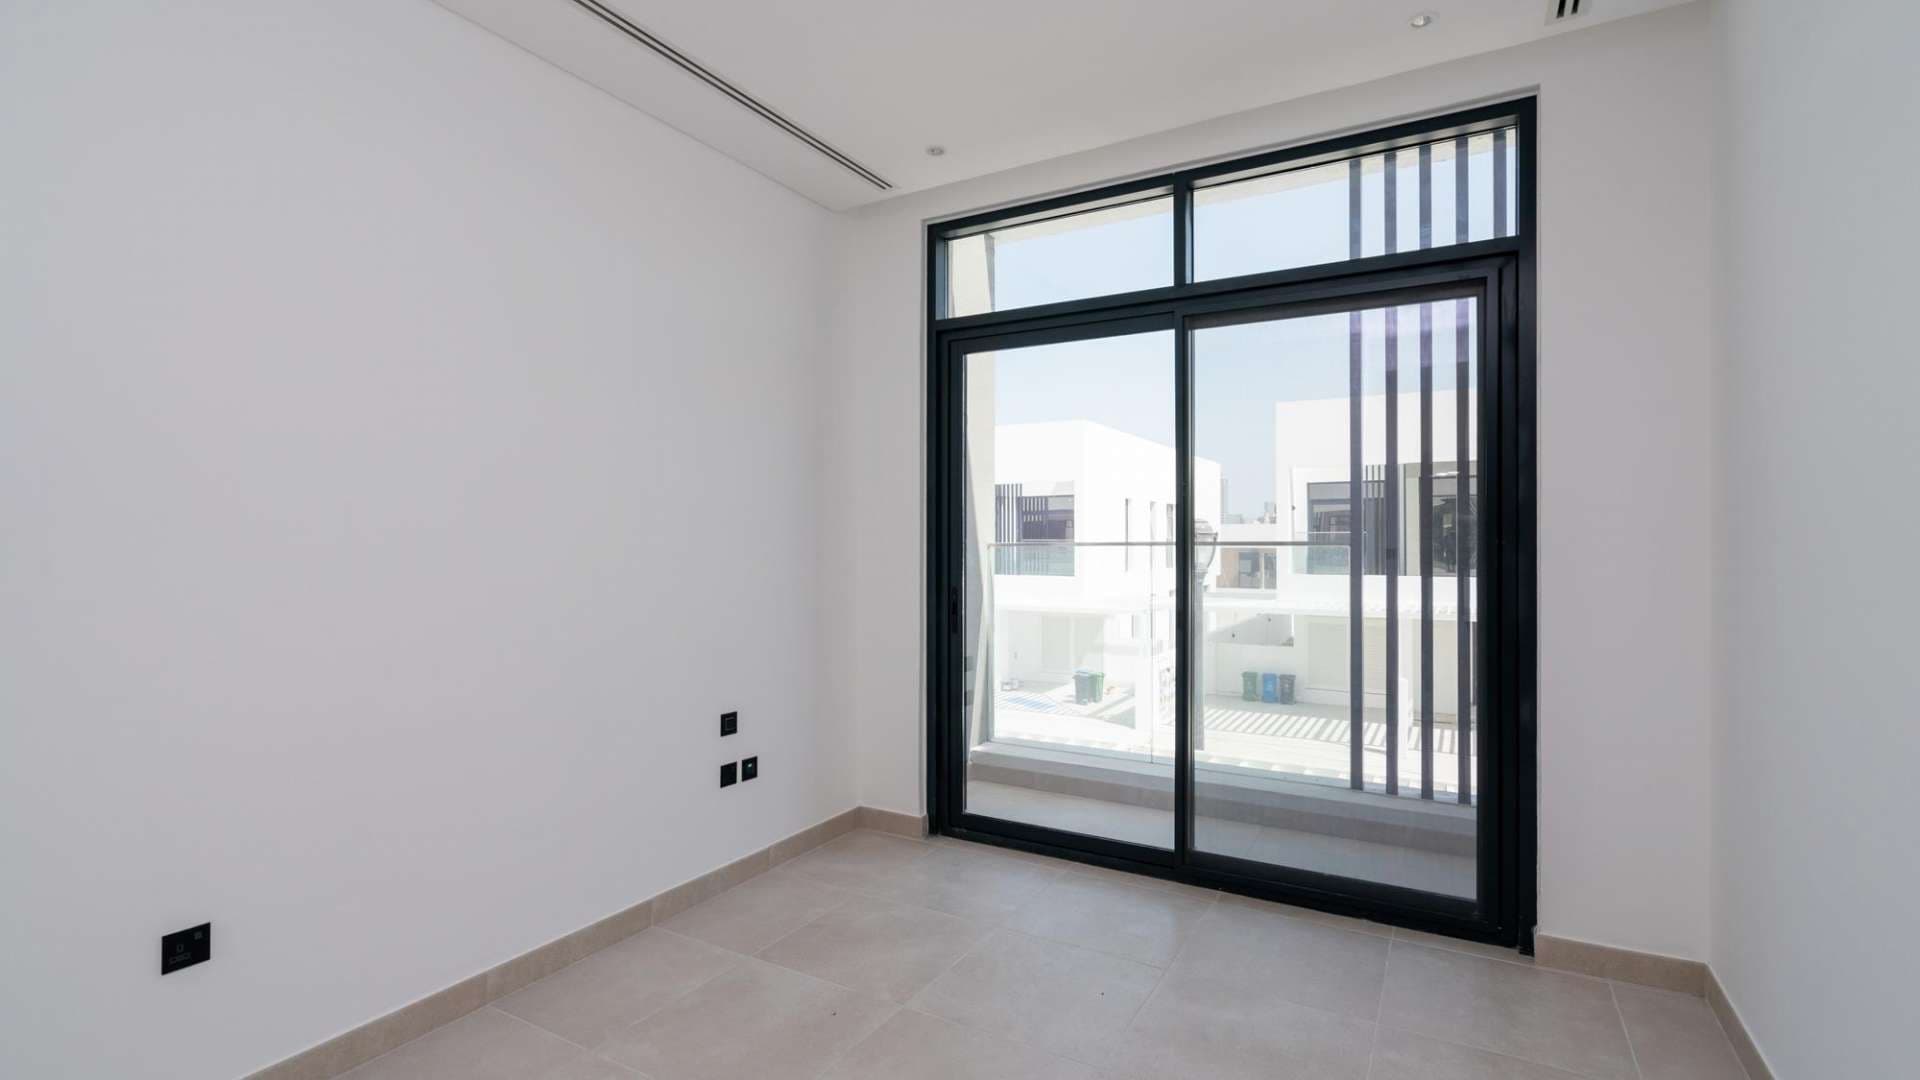 3 Bedroom Townhouse For Sale Jumeirah Luxury Living Lp03617 D93ced8be60a900.jpg